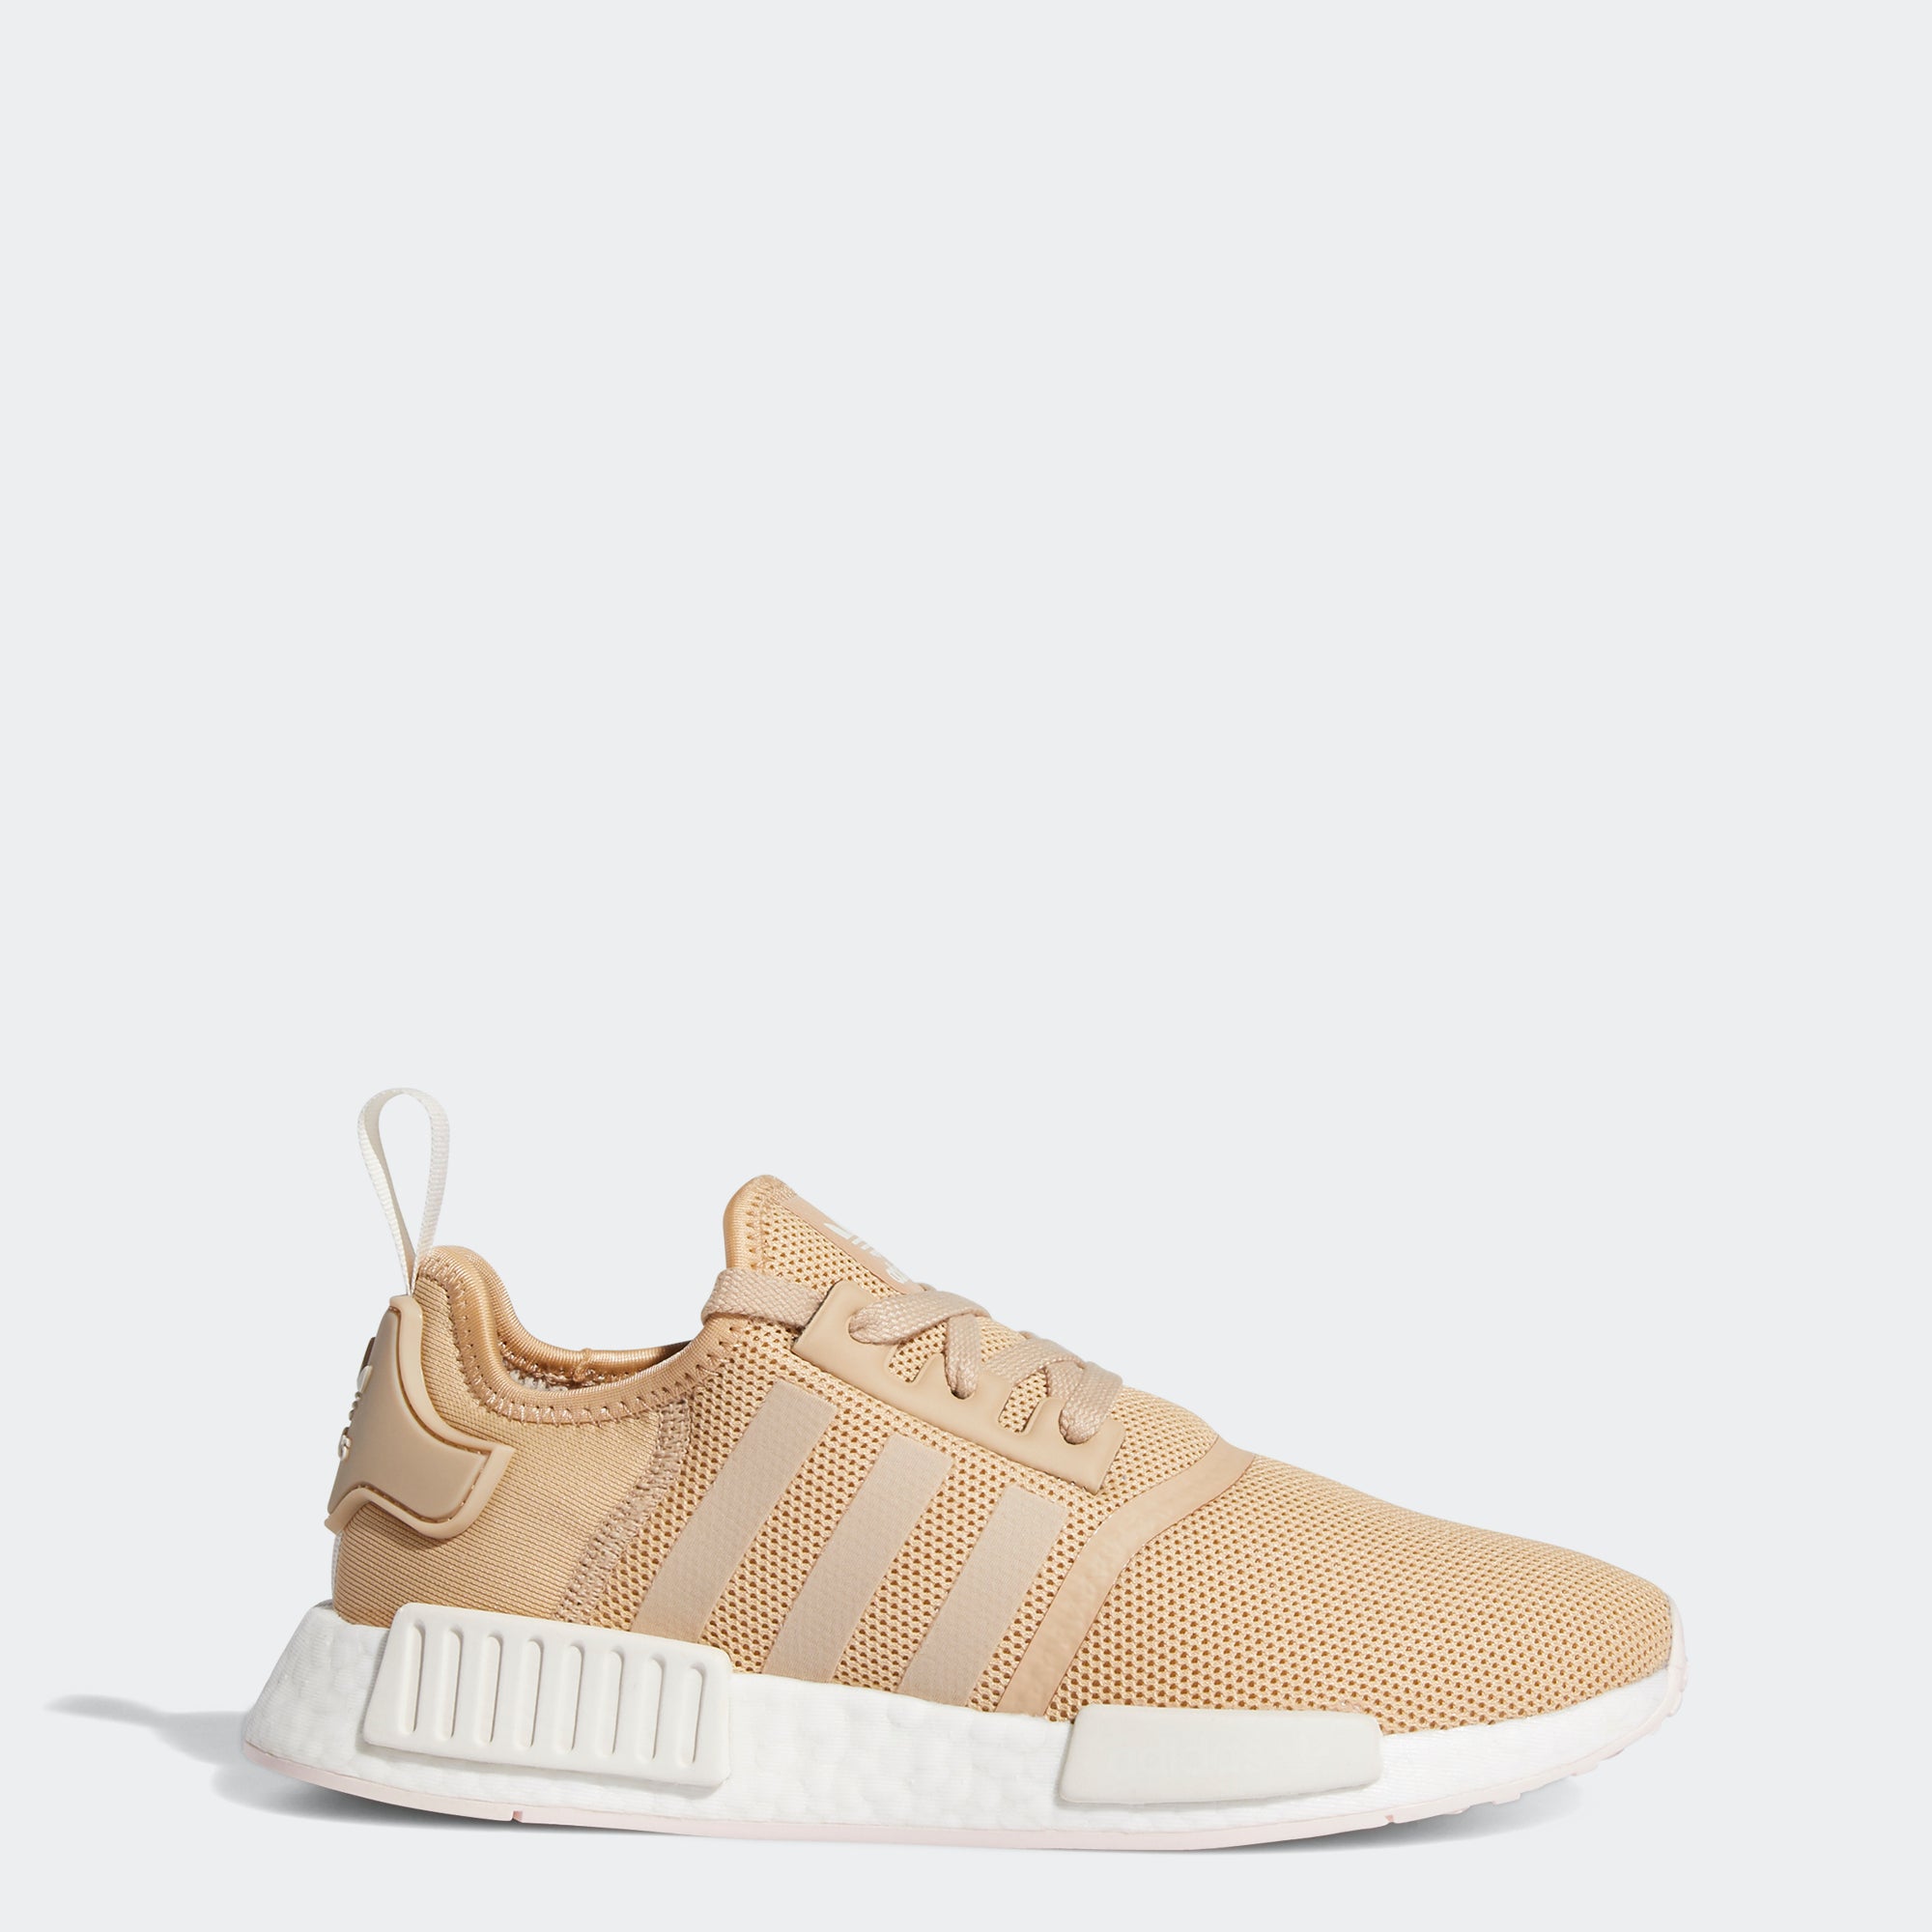 nmd_r1 shoes women's